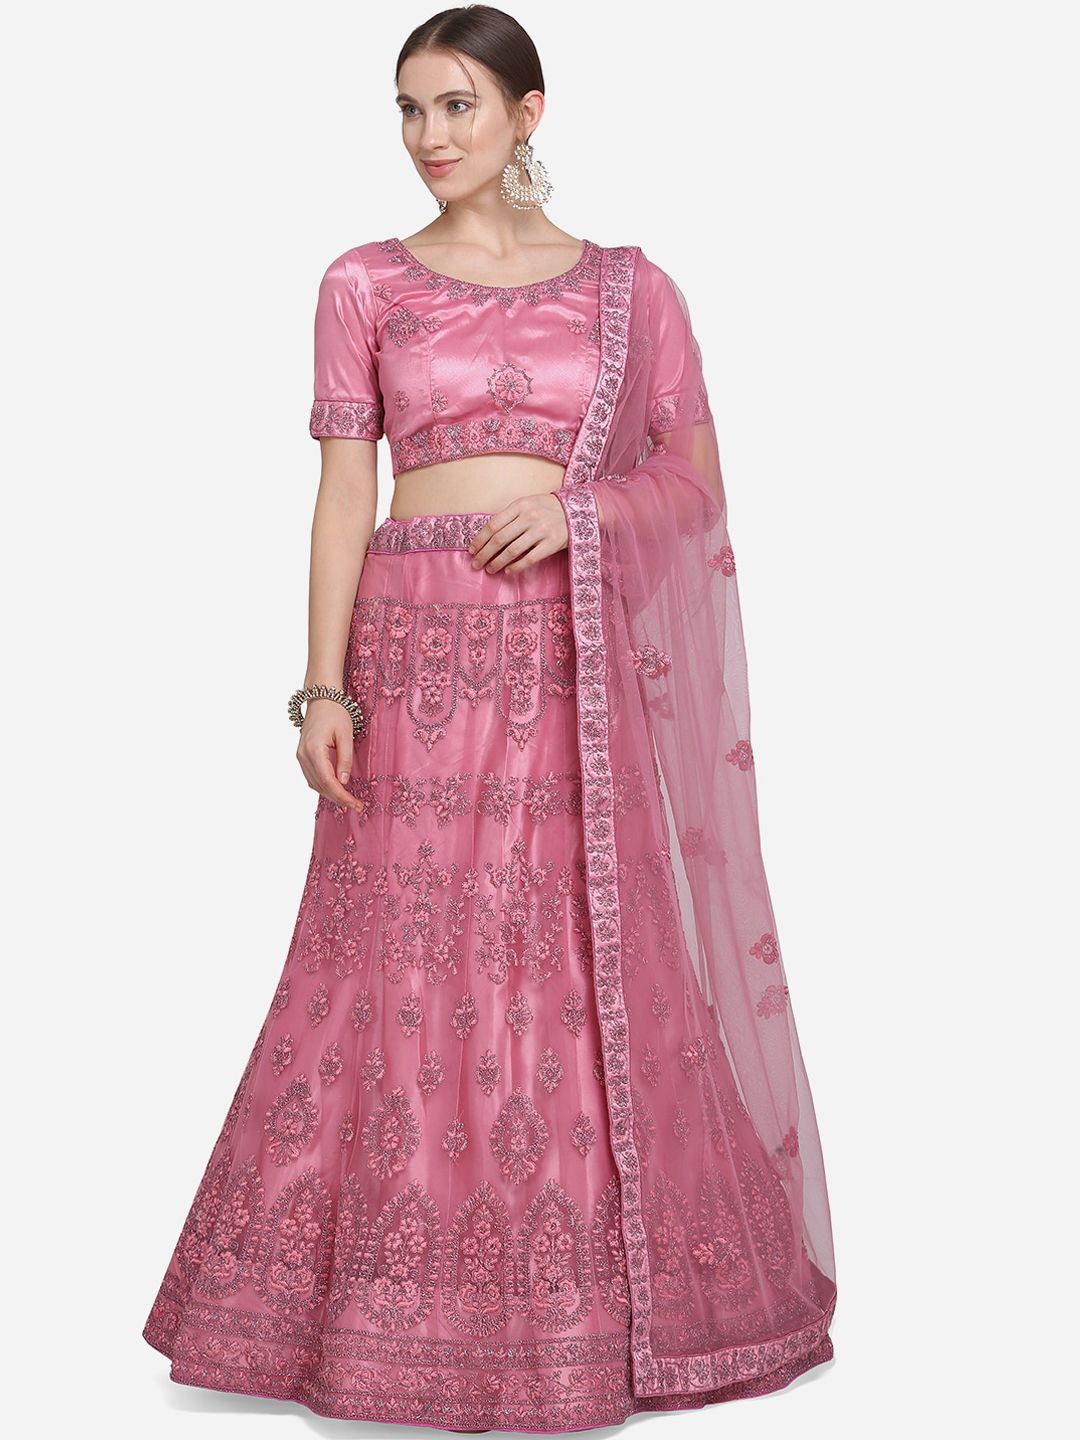 VRSALES Pink Semi-Stitched Lehenga & Blouse with Dupatta Price in India